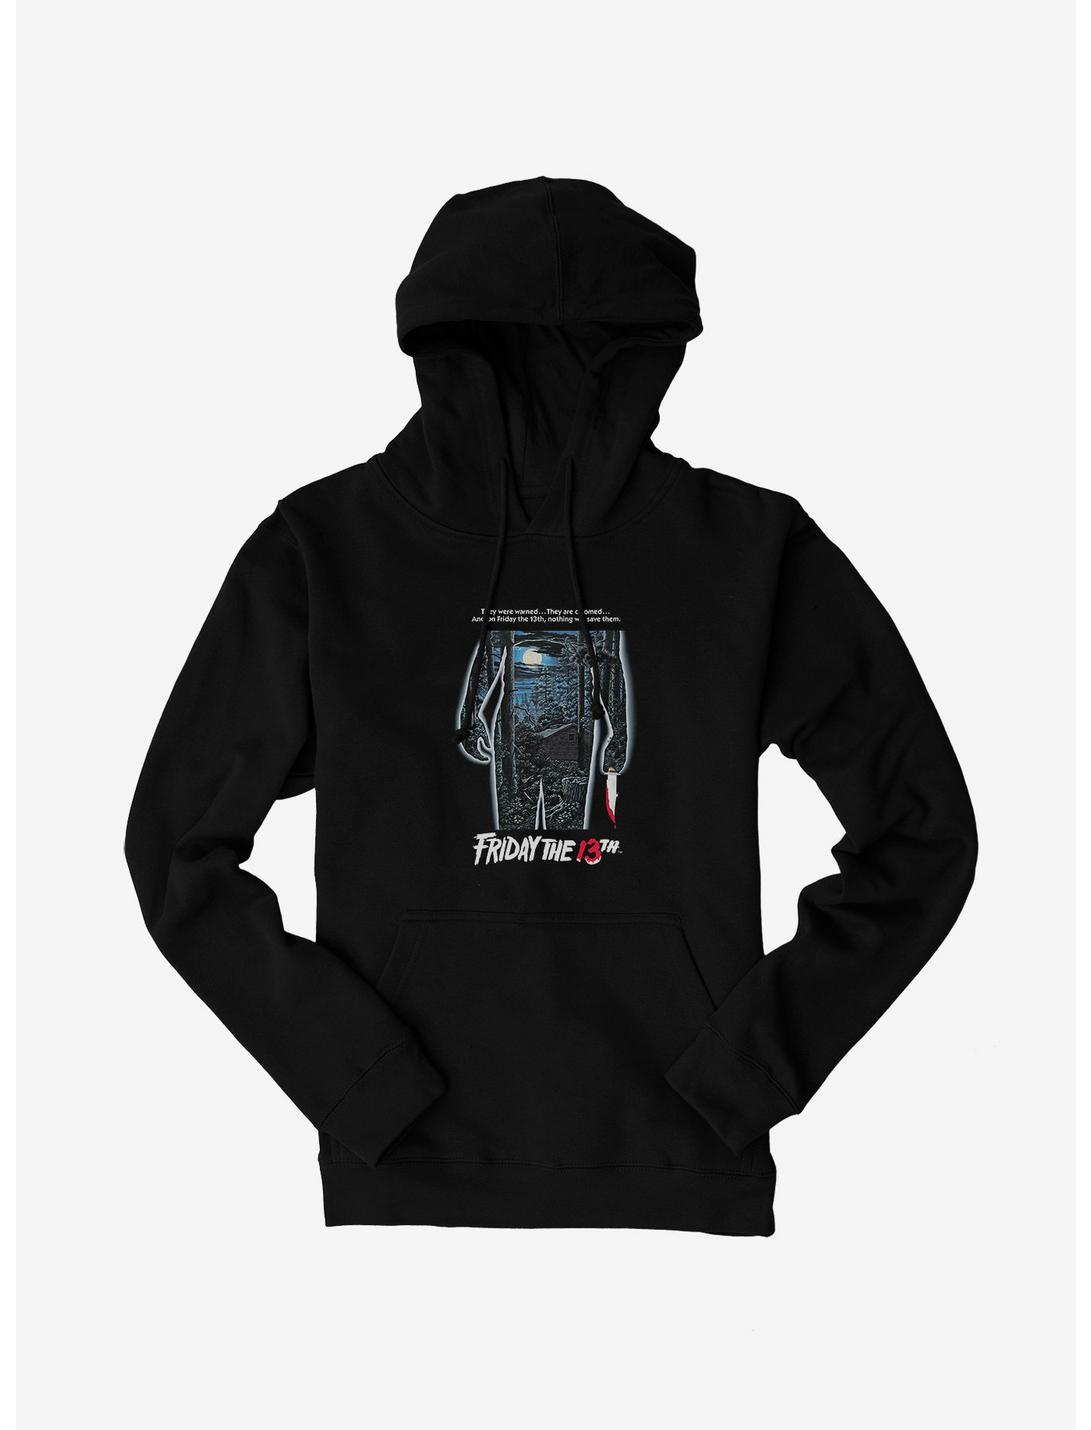 Friday The 13th Poster Hoodie, BLACK, hi-res